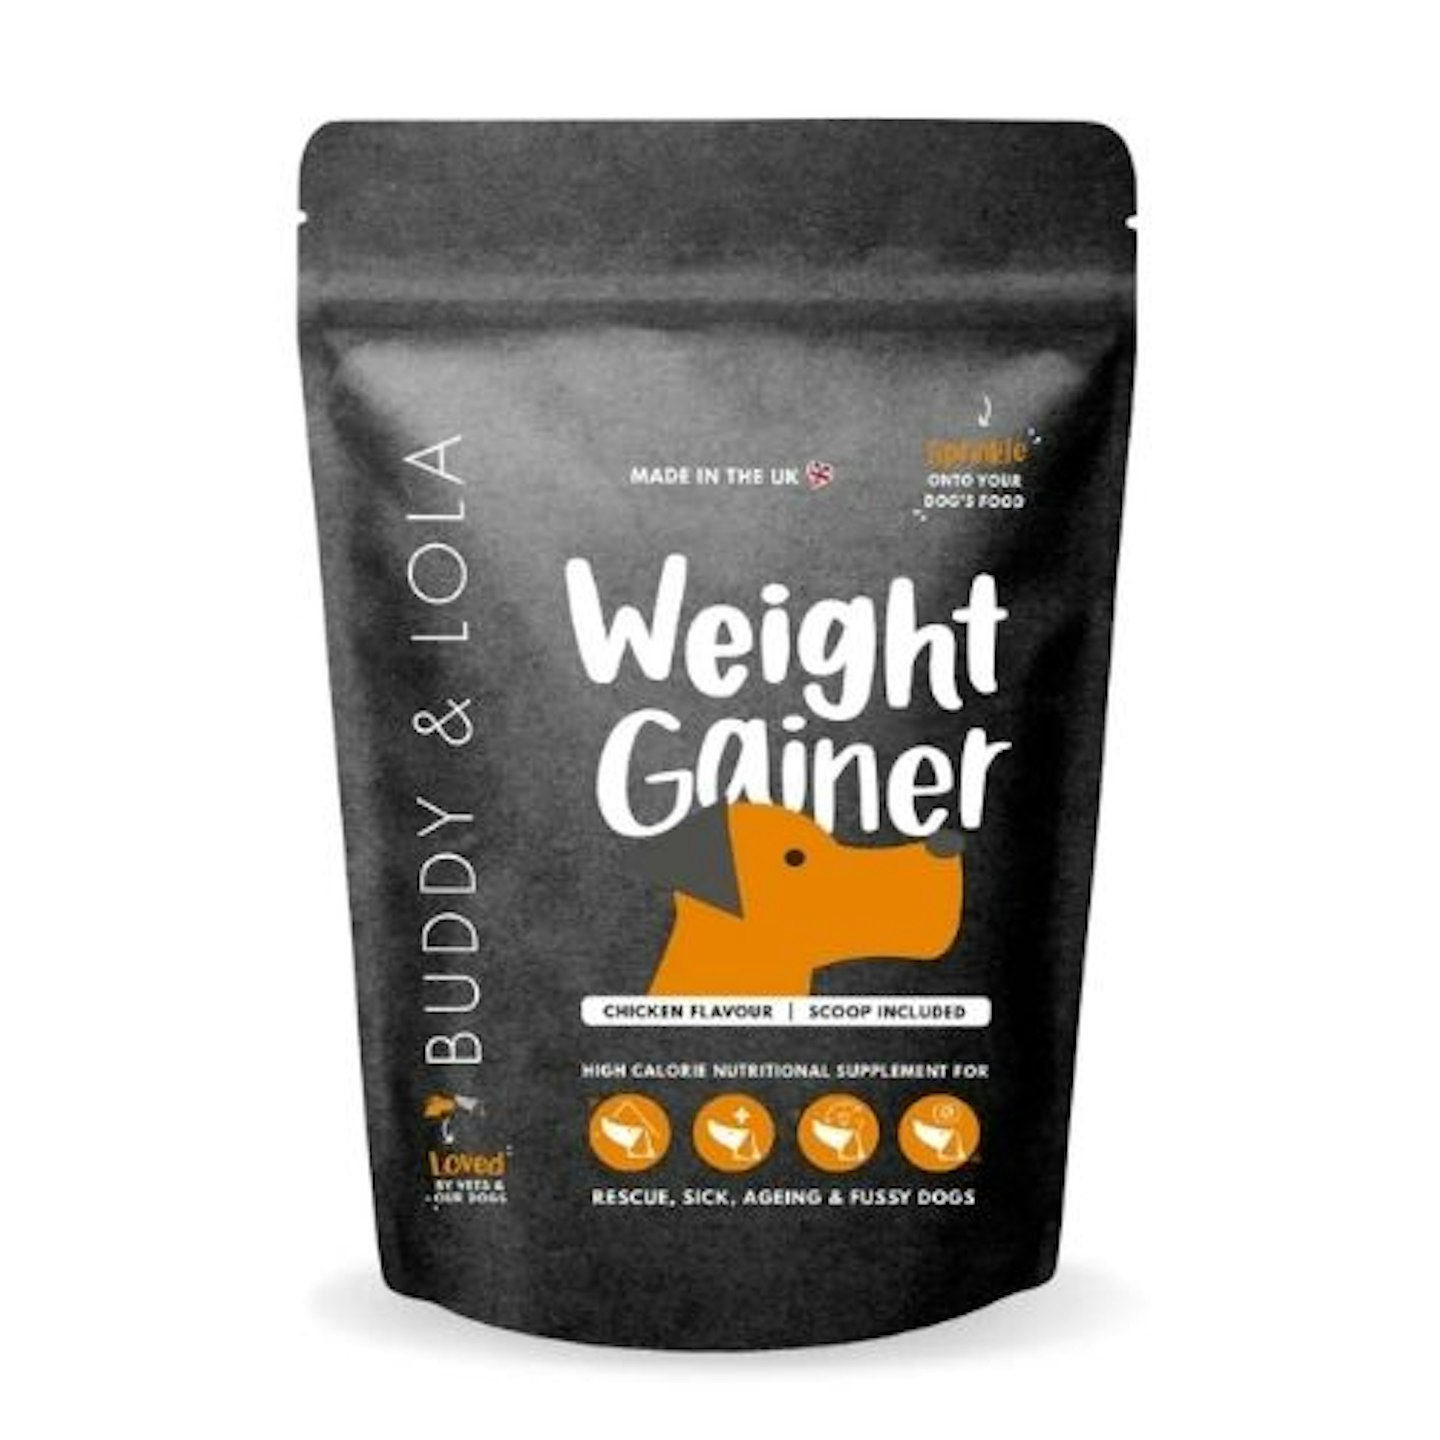 Buddy & Lola Dog Weight Gainer Supplement - Great for Fussy Eaters, Helps Build Muscle, Aids Recovery From Injury - A Must Have For Rescue And Re-homed Dogs Who Need to Gain Weight